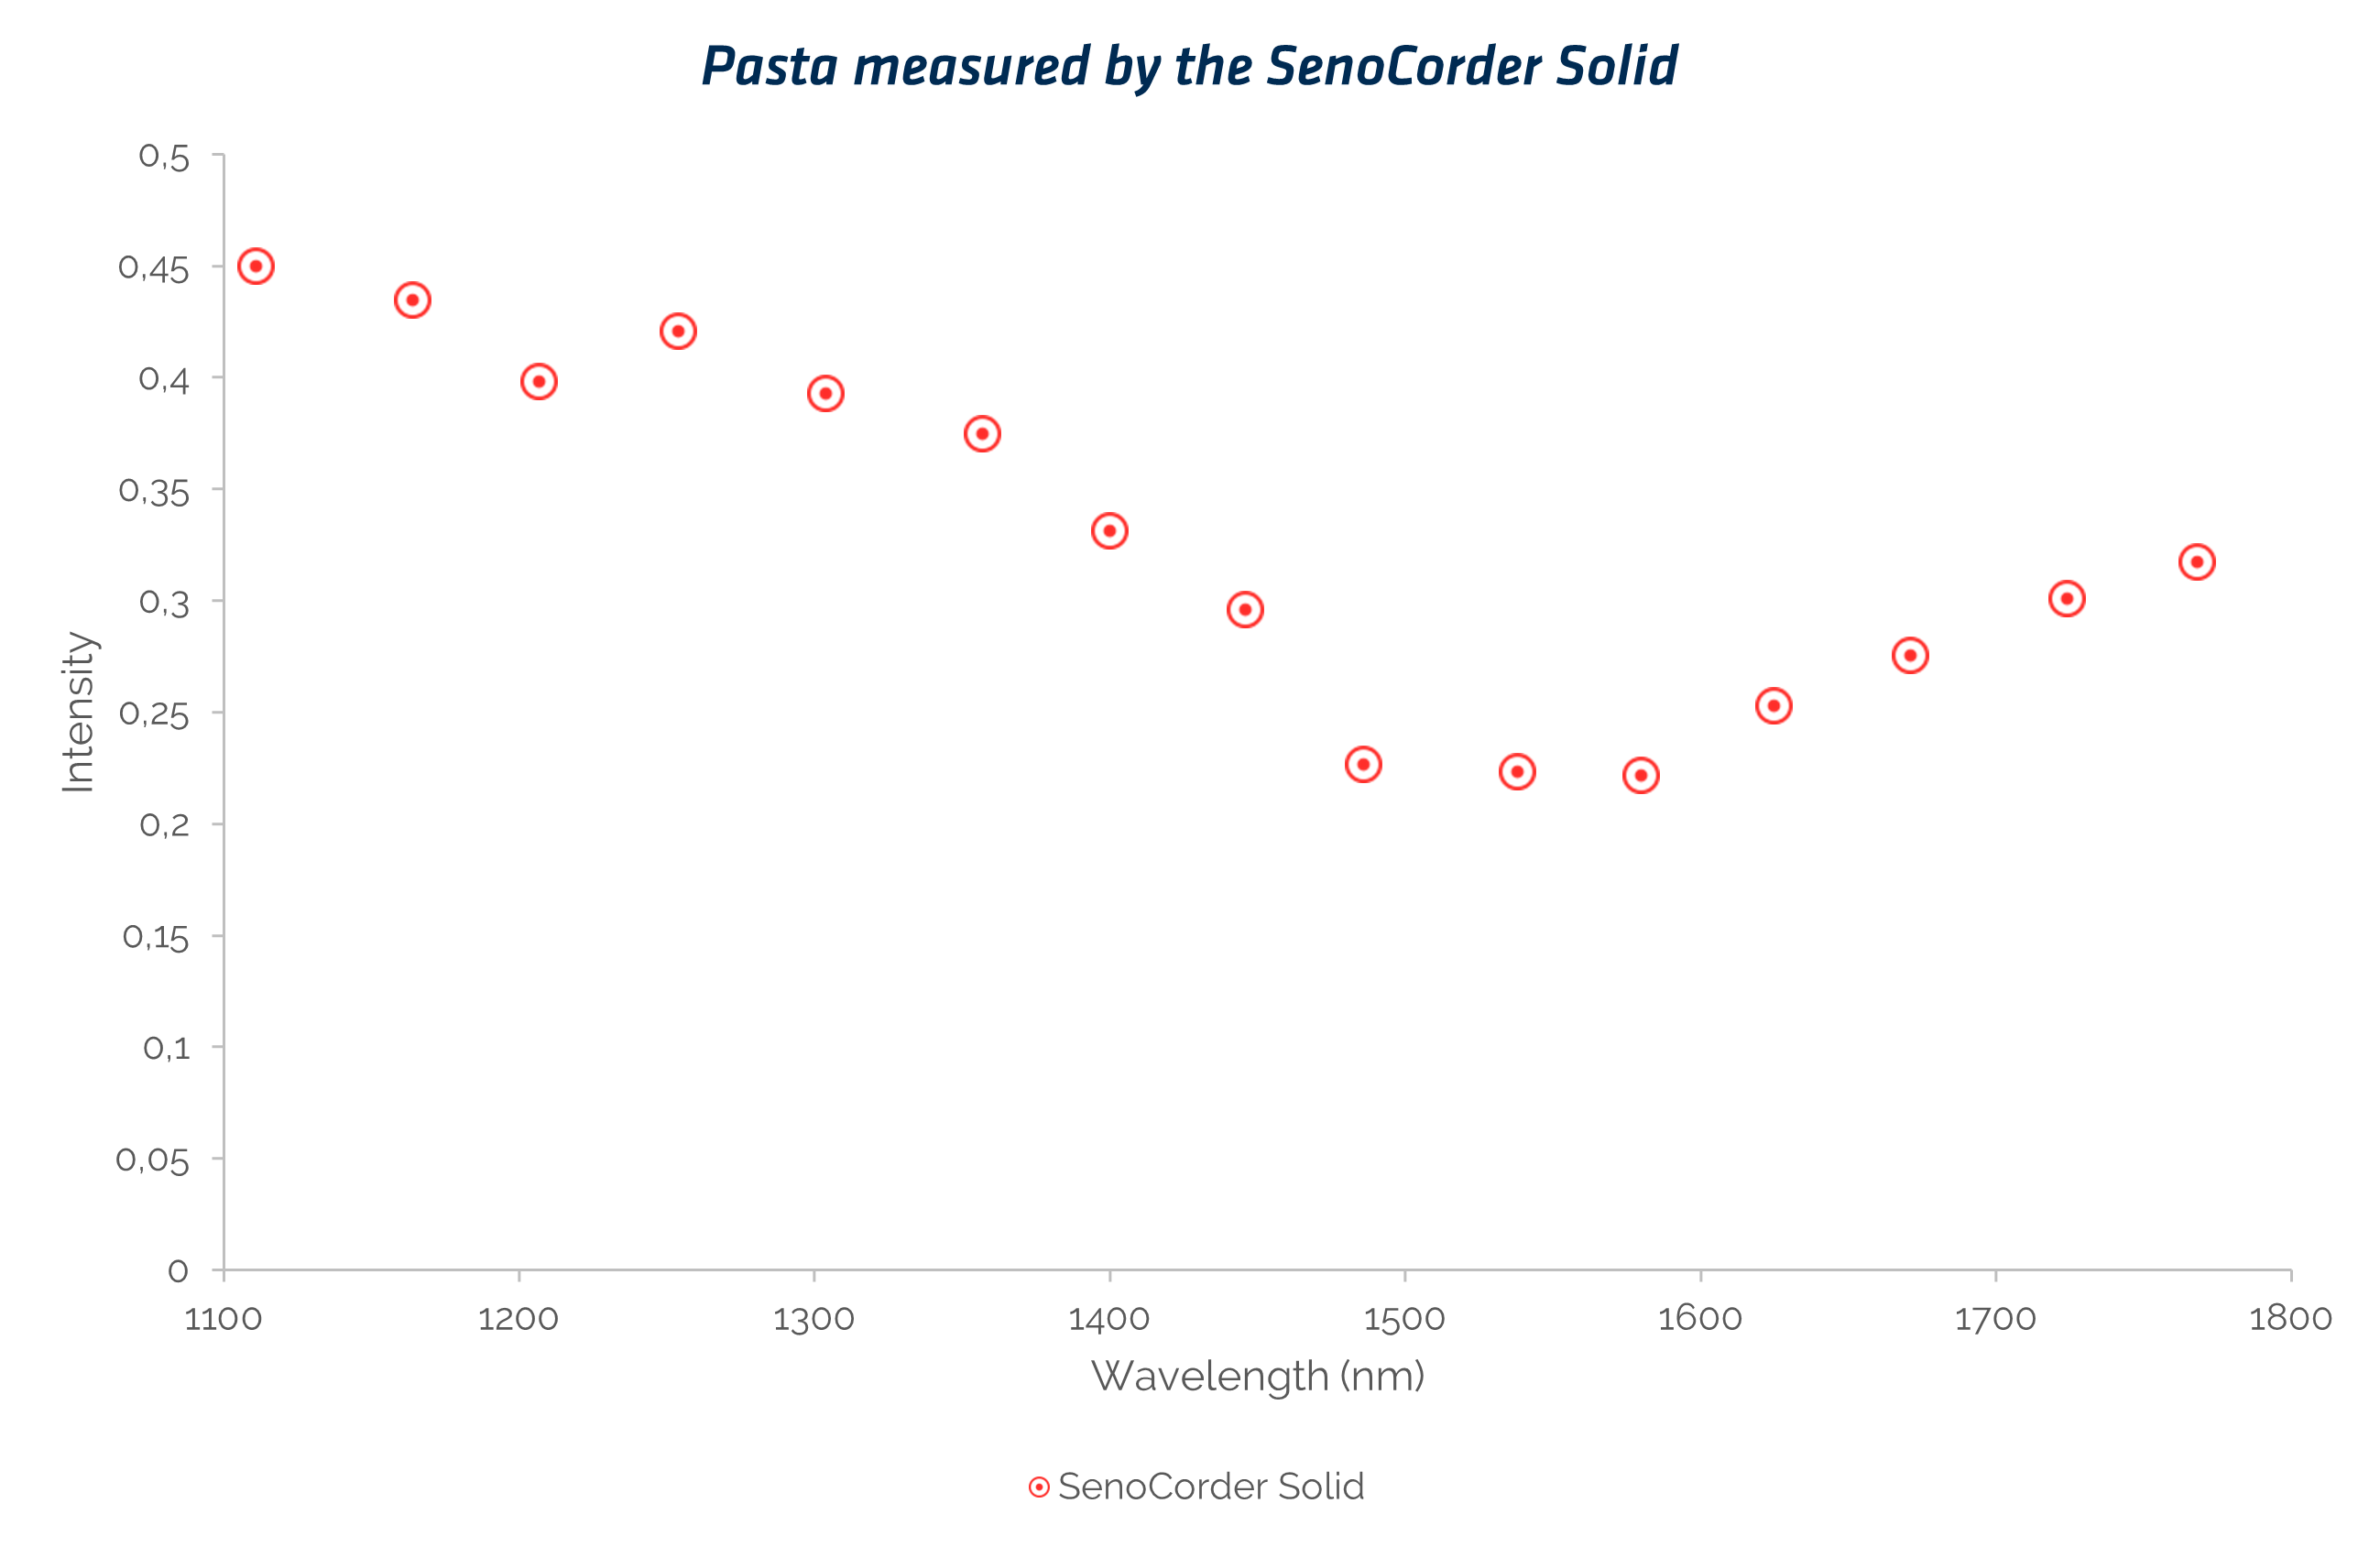 Pasta measured by the SenoCorder Solid